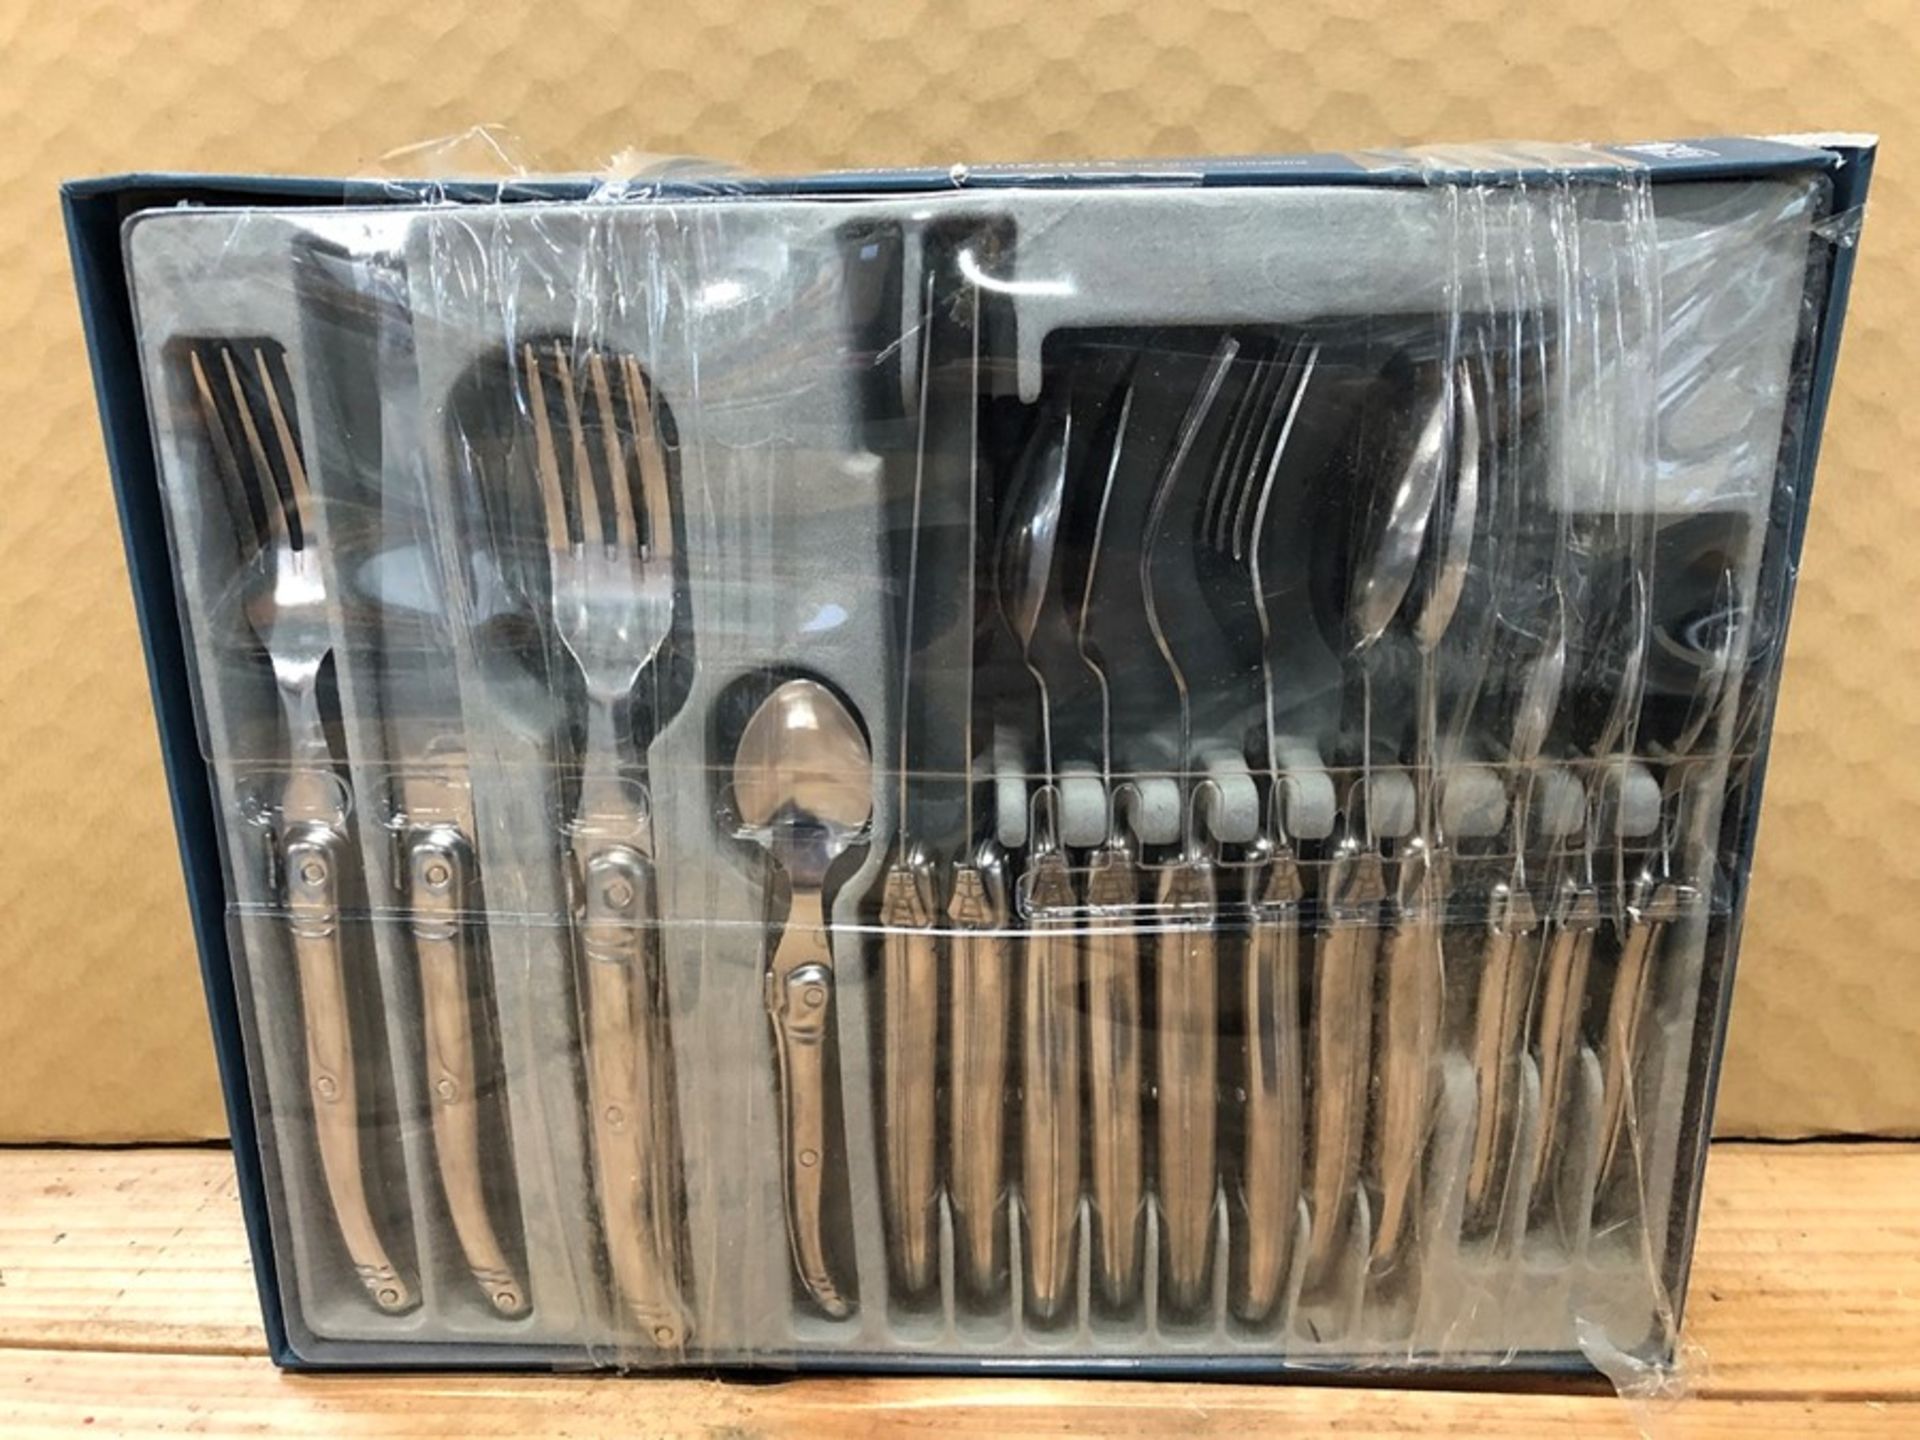 1 LOT TO CONTAIN LA GUIOLE HERITAGE STAINLESS STEEL CUTLERY SET / 24 PCS